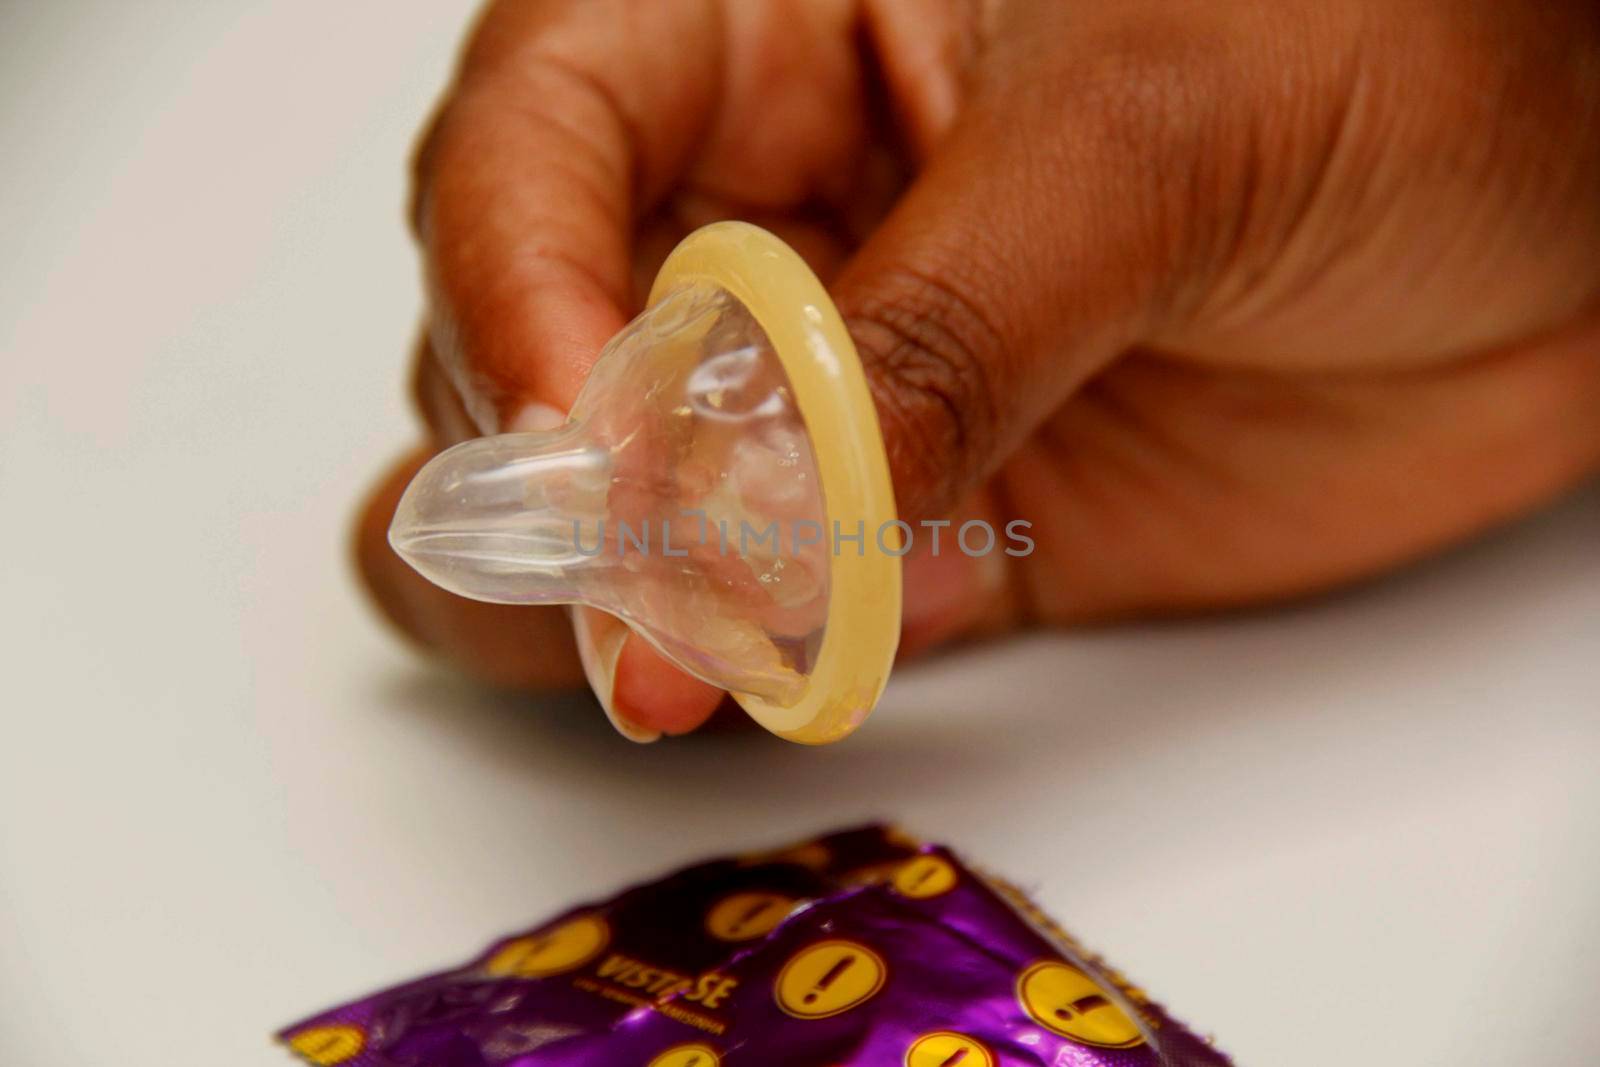 salvador, bahia / brazil - february 6, 2013: hand holds male condom, contraceptive method and also used to control sexually transmitted diseases.
